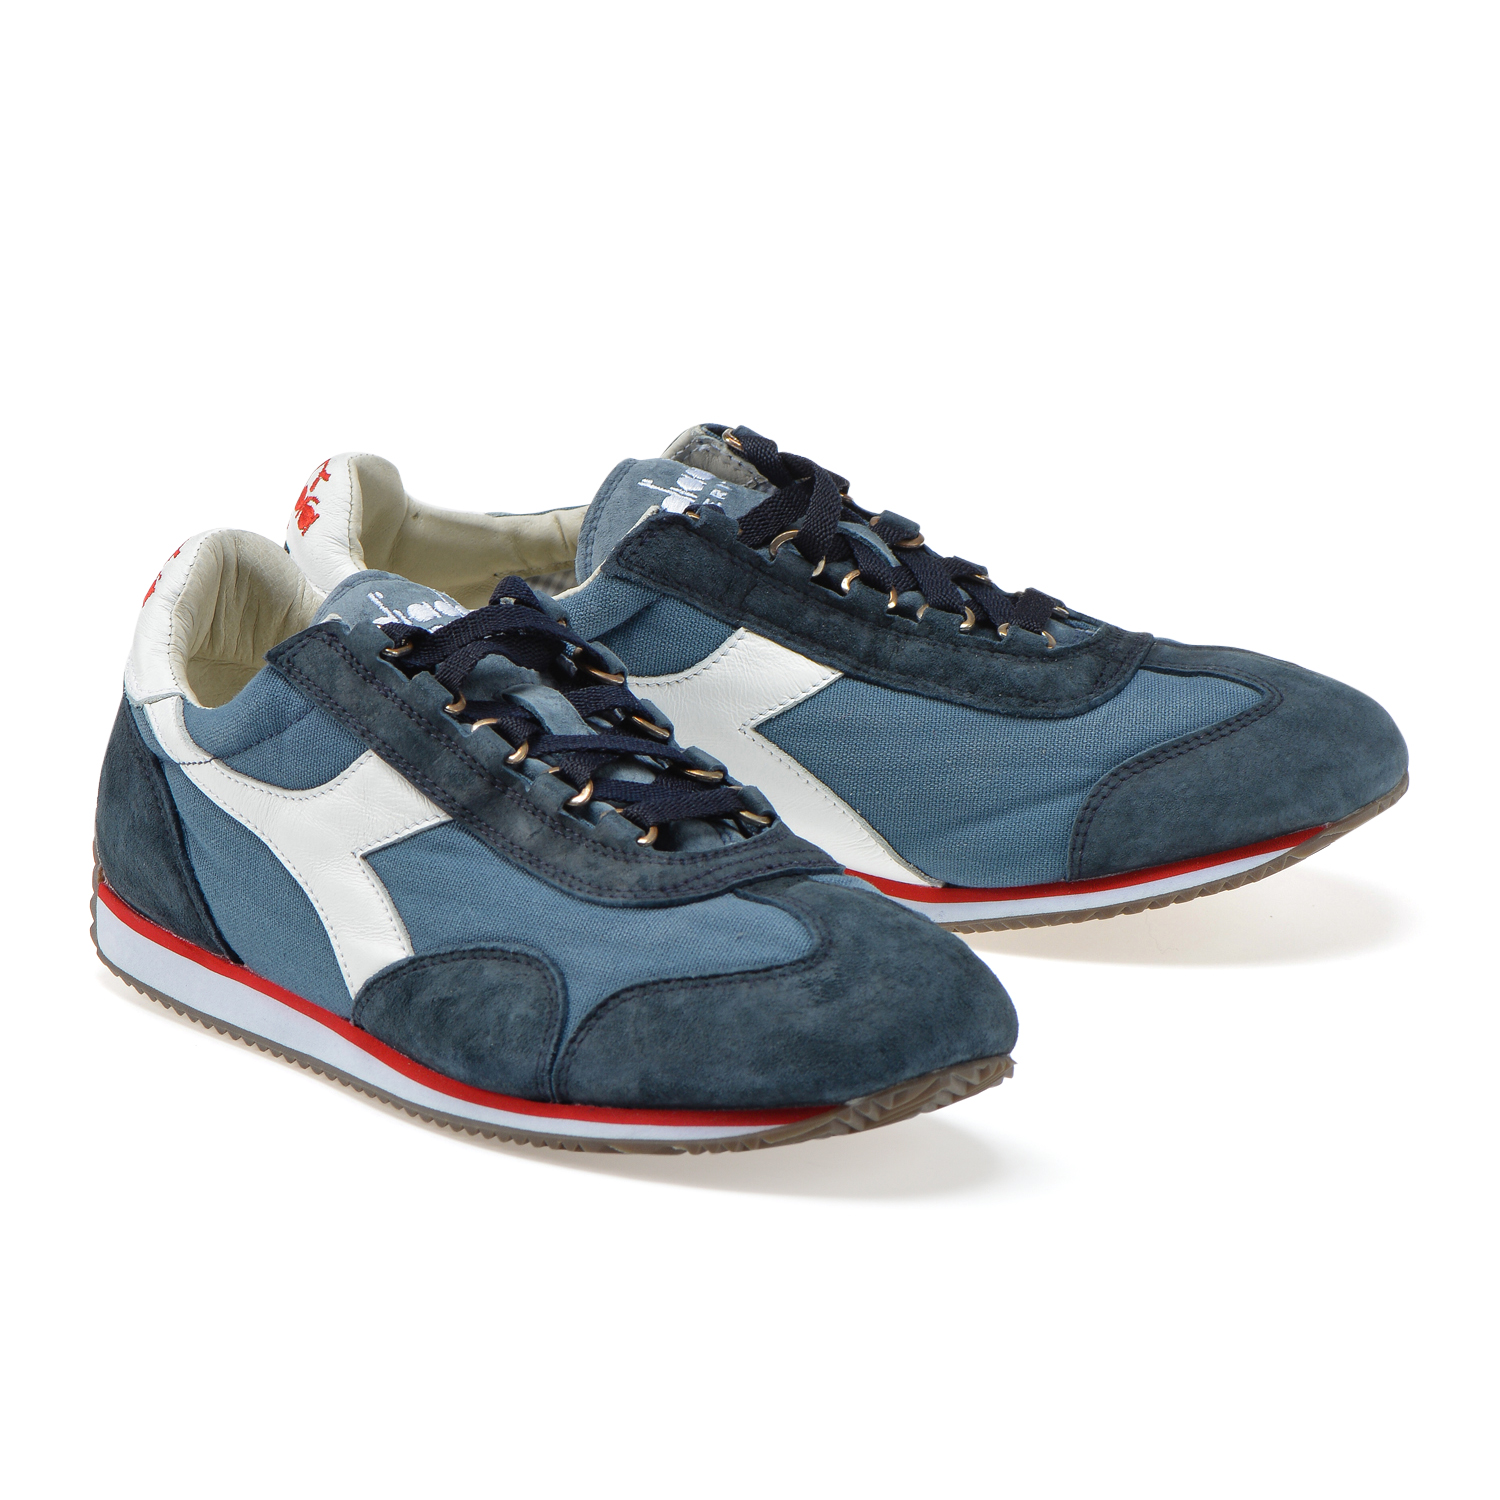 Diadora Heritage - Sneakers EQUIPE STONE WASH 12 for man and woman | eBay